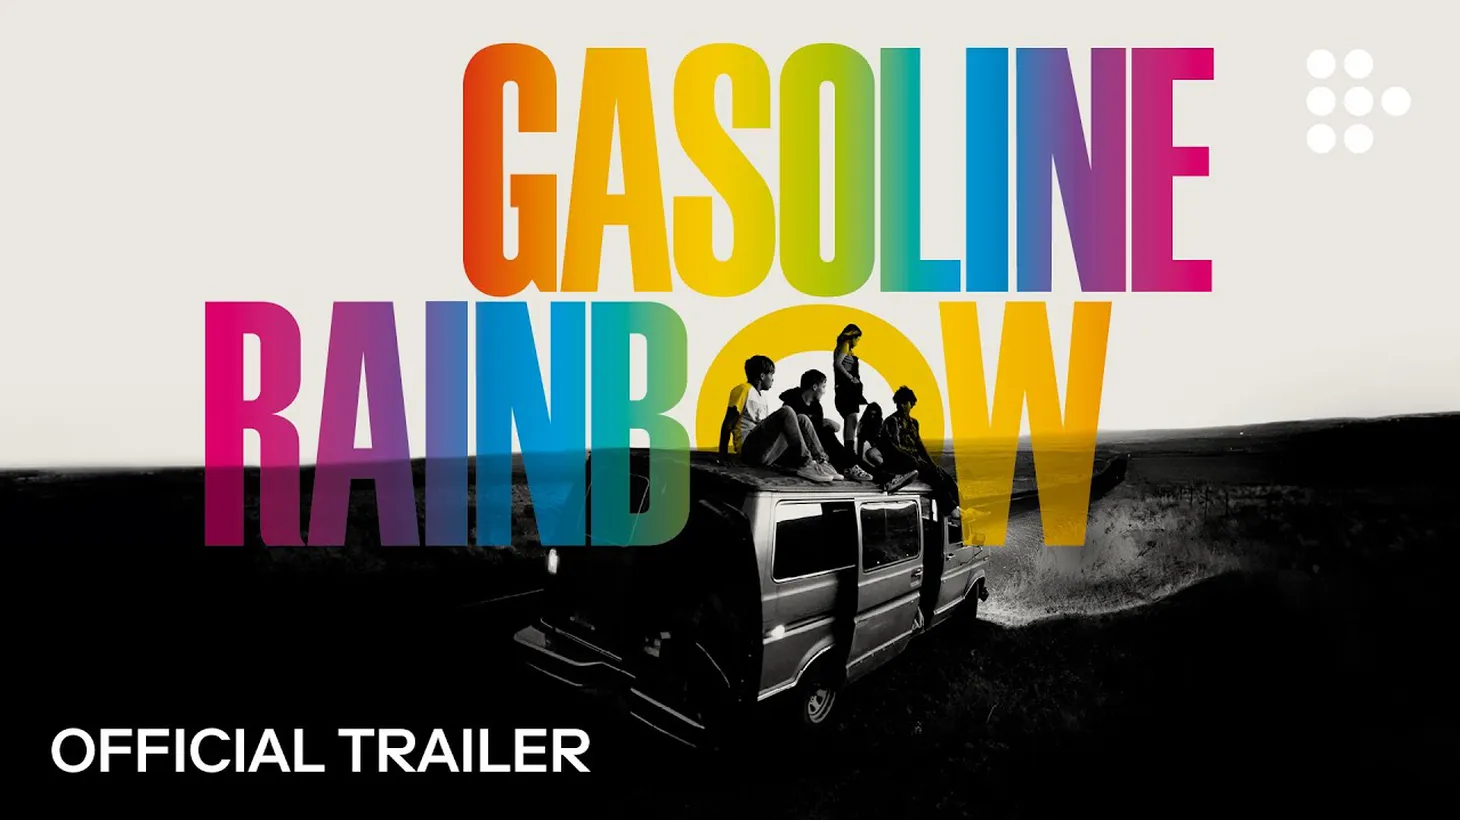 In “Gasoline Rainbow,” five high school graduates from small-town Oregon venture 500 miles to the Pacific coast.